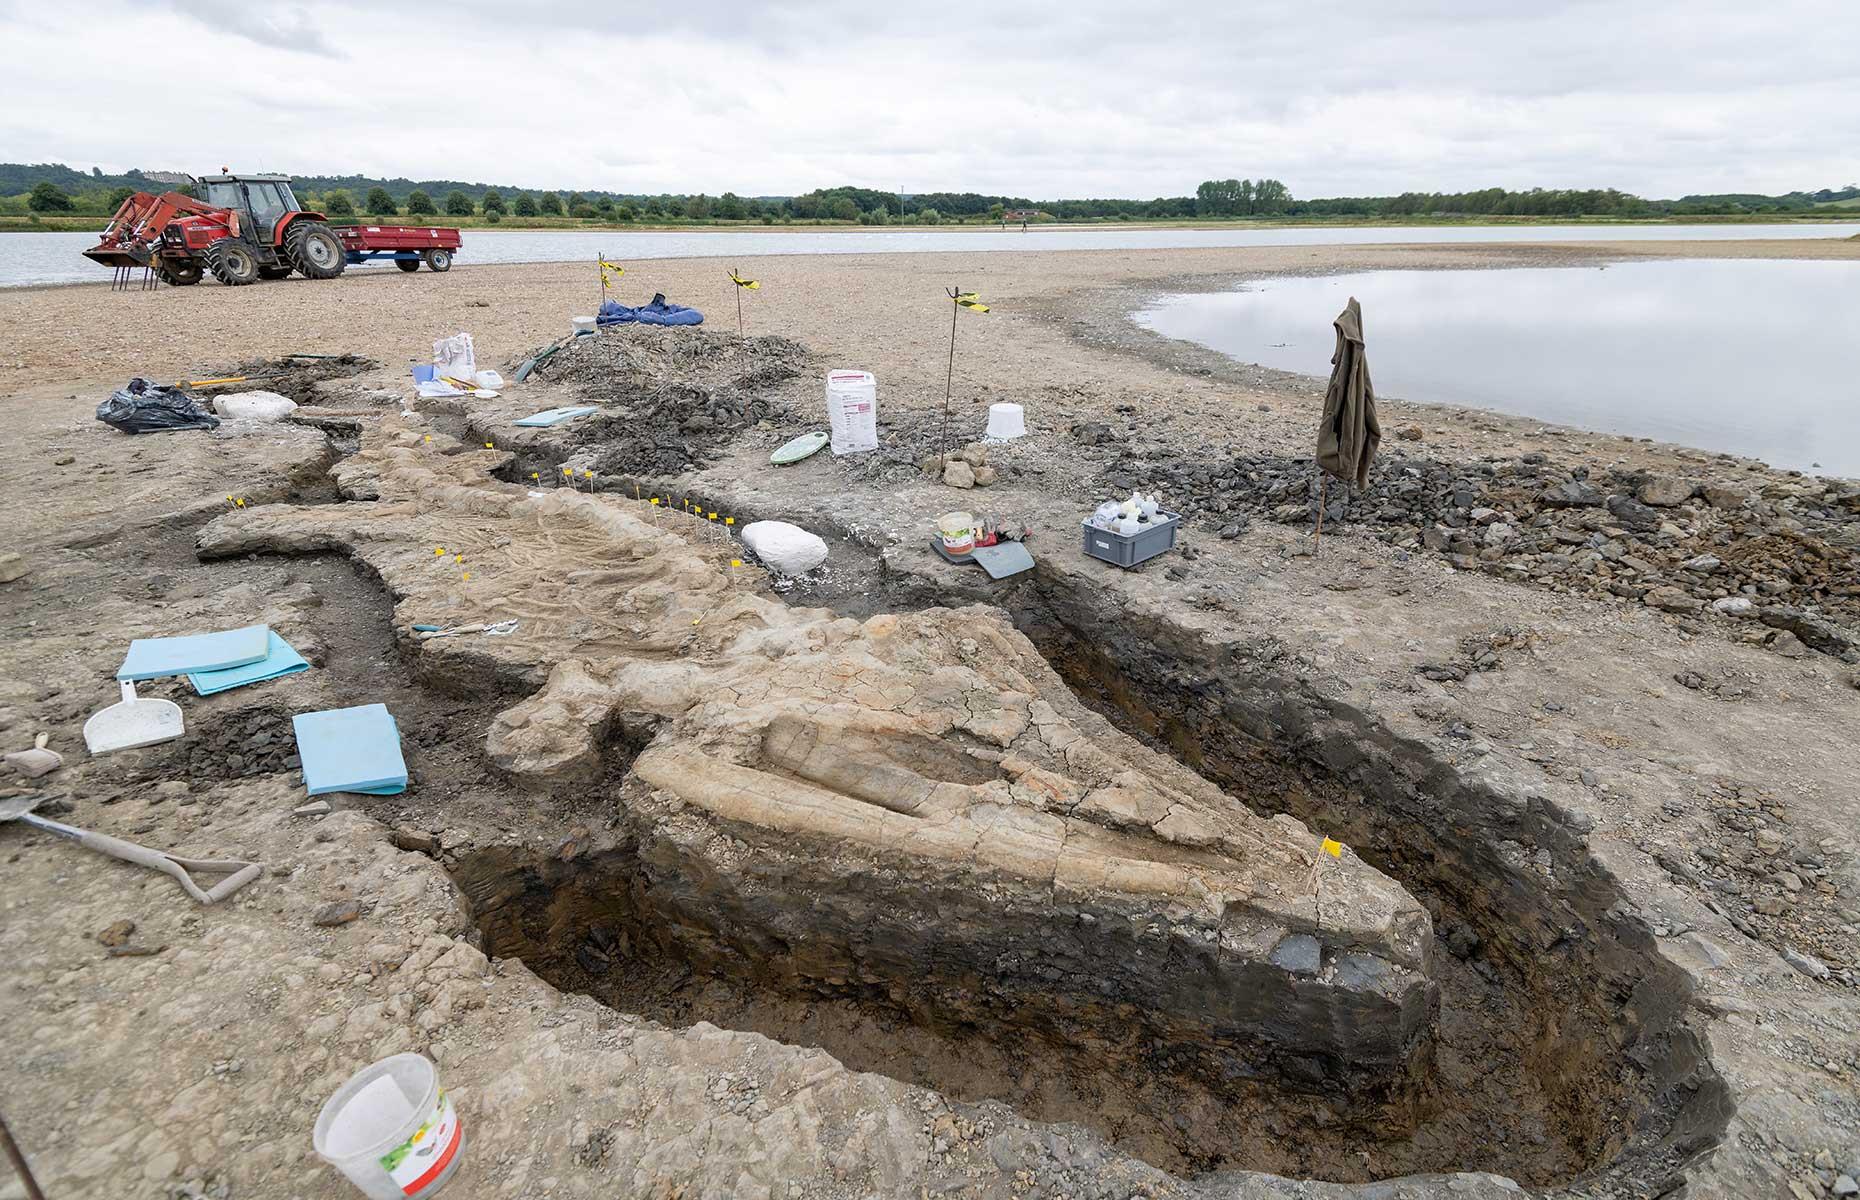 <p>The sea dragon has been hailed as one of the UK's greatest fossil finds. After excavations in August and September 2021, the skeleton was revealed to measure around 33 feet (10m) in length and is thought to date back 180 million years. It's not the first ichthyosaur to be found here. In the 1970s, two much smaller and incomplete skeletons were uncovered, but the well-preserved nature of the most recent discovery makes it much more important.</p>